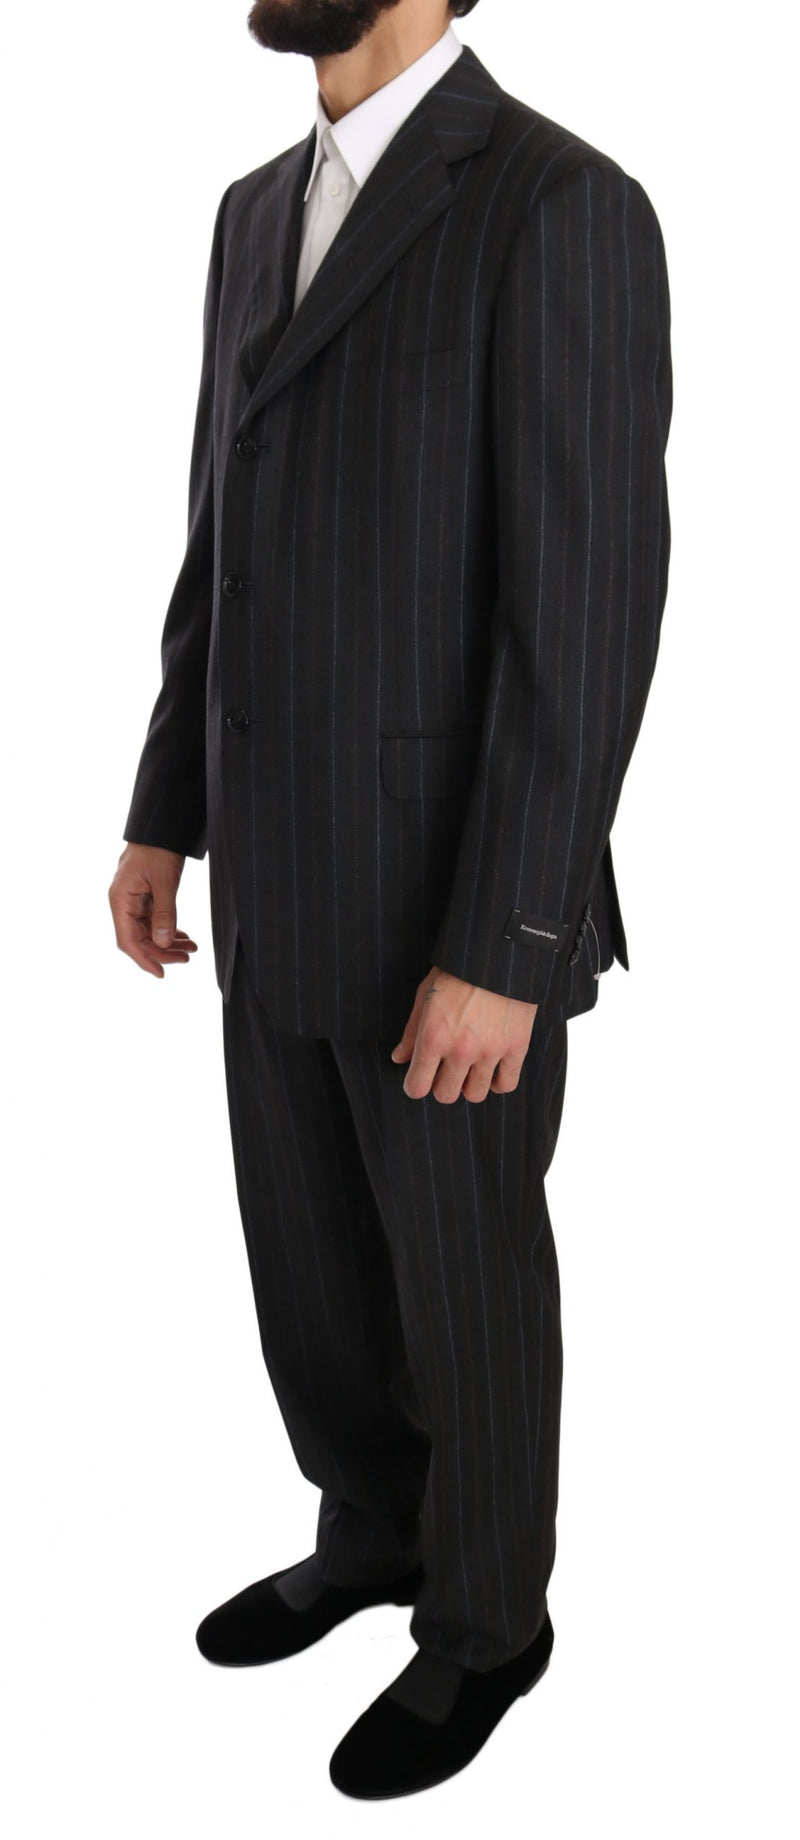 Gray Stripe Two Piece 3 Button Wool Suit